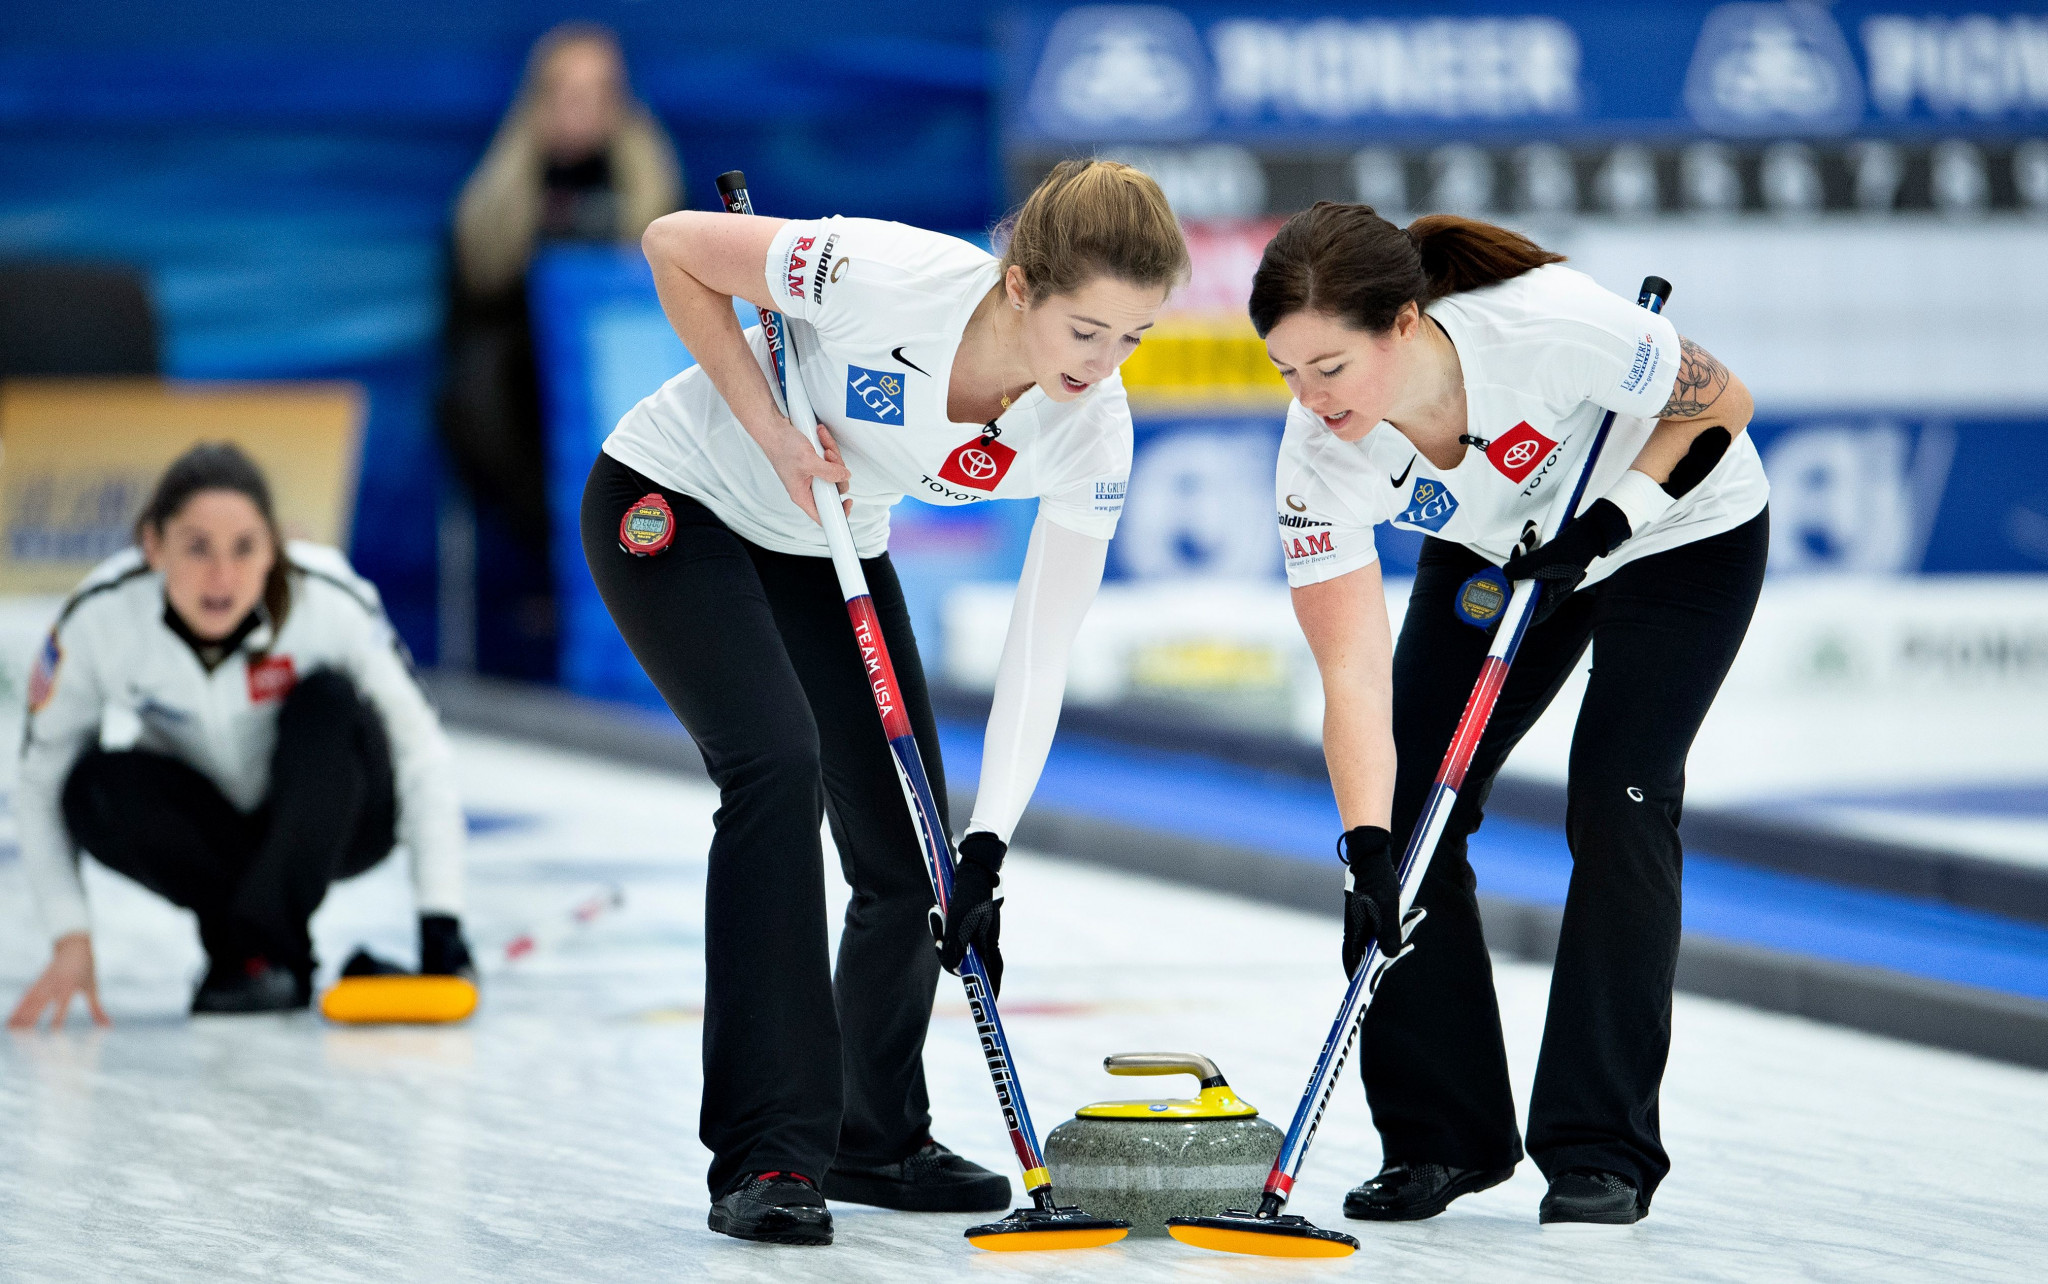 USA Curling announces high performance programme athletes for 2019-20 season